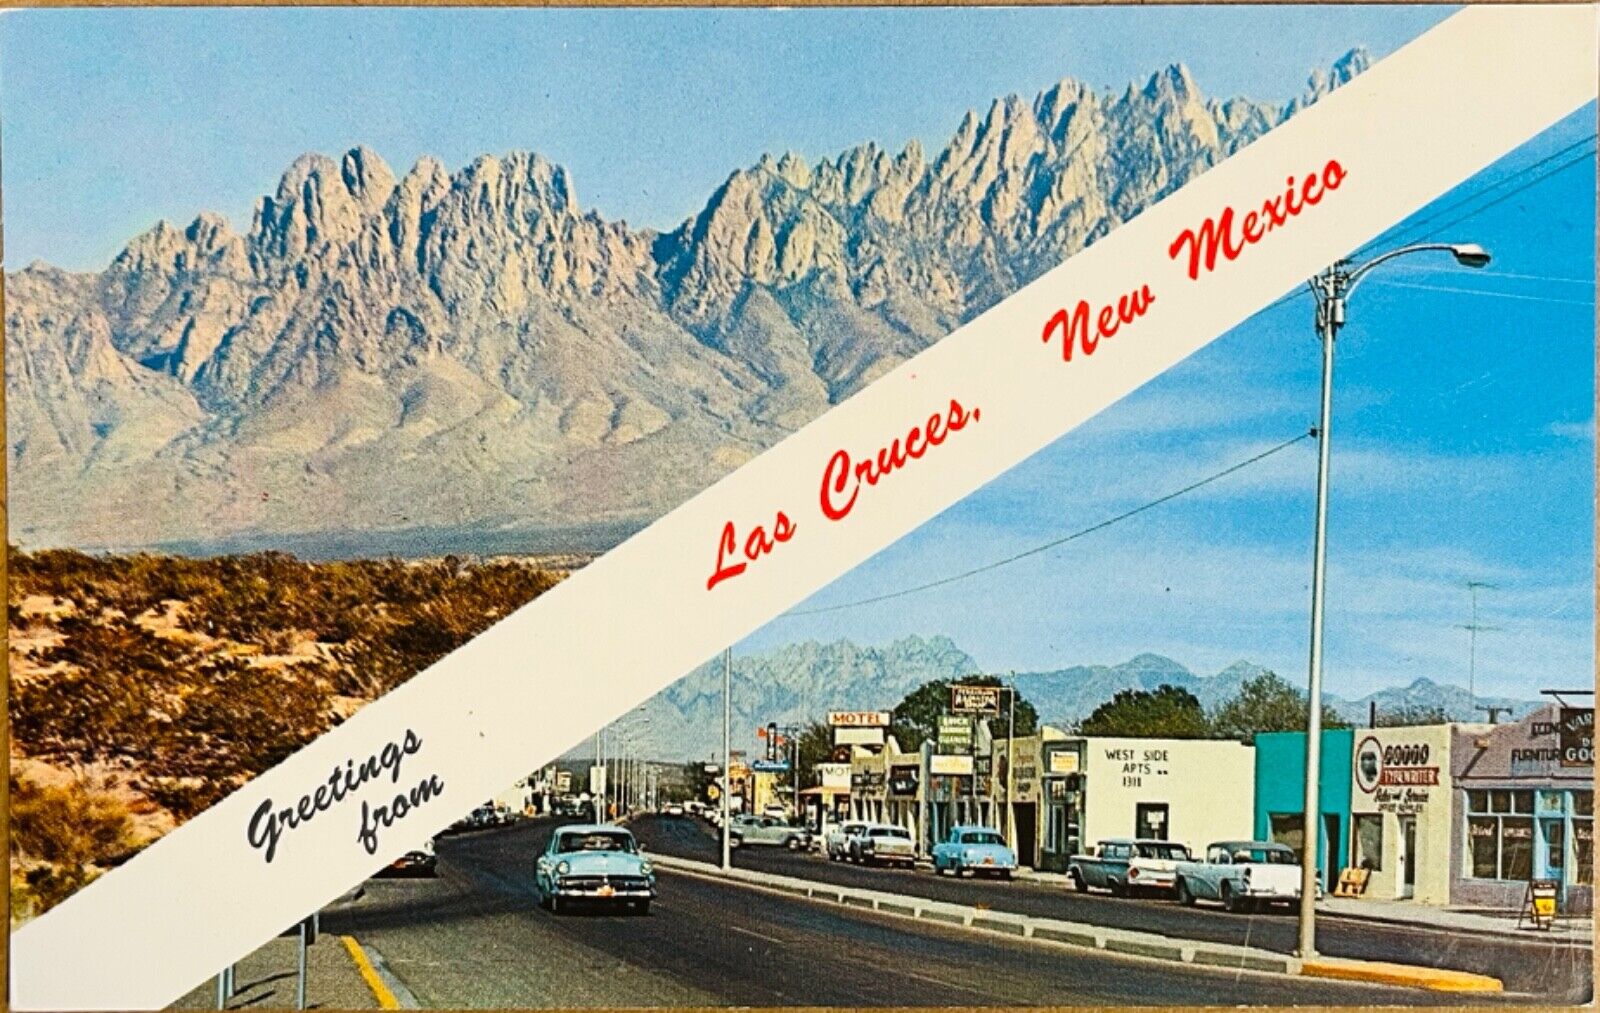 Las Cruces Main Street Scene Banner Greeting Old Car New Mexico Postcard c1950